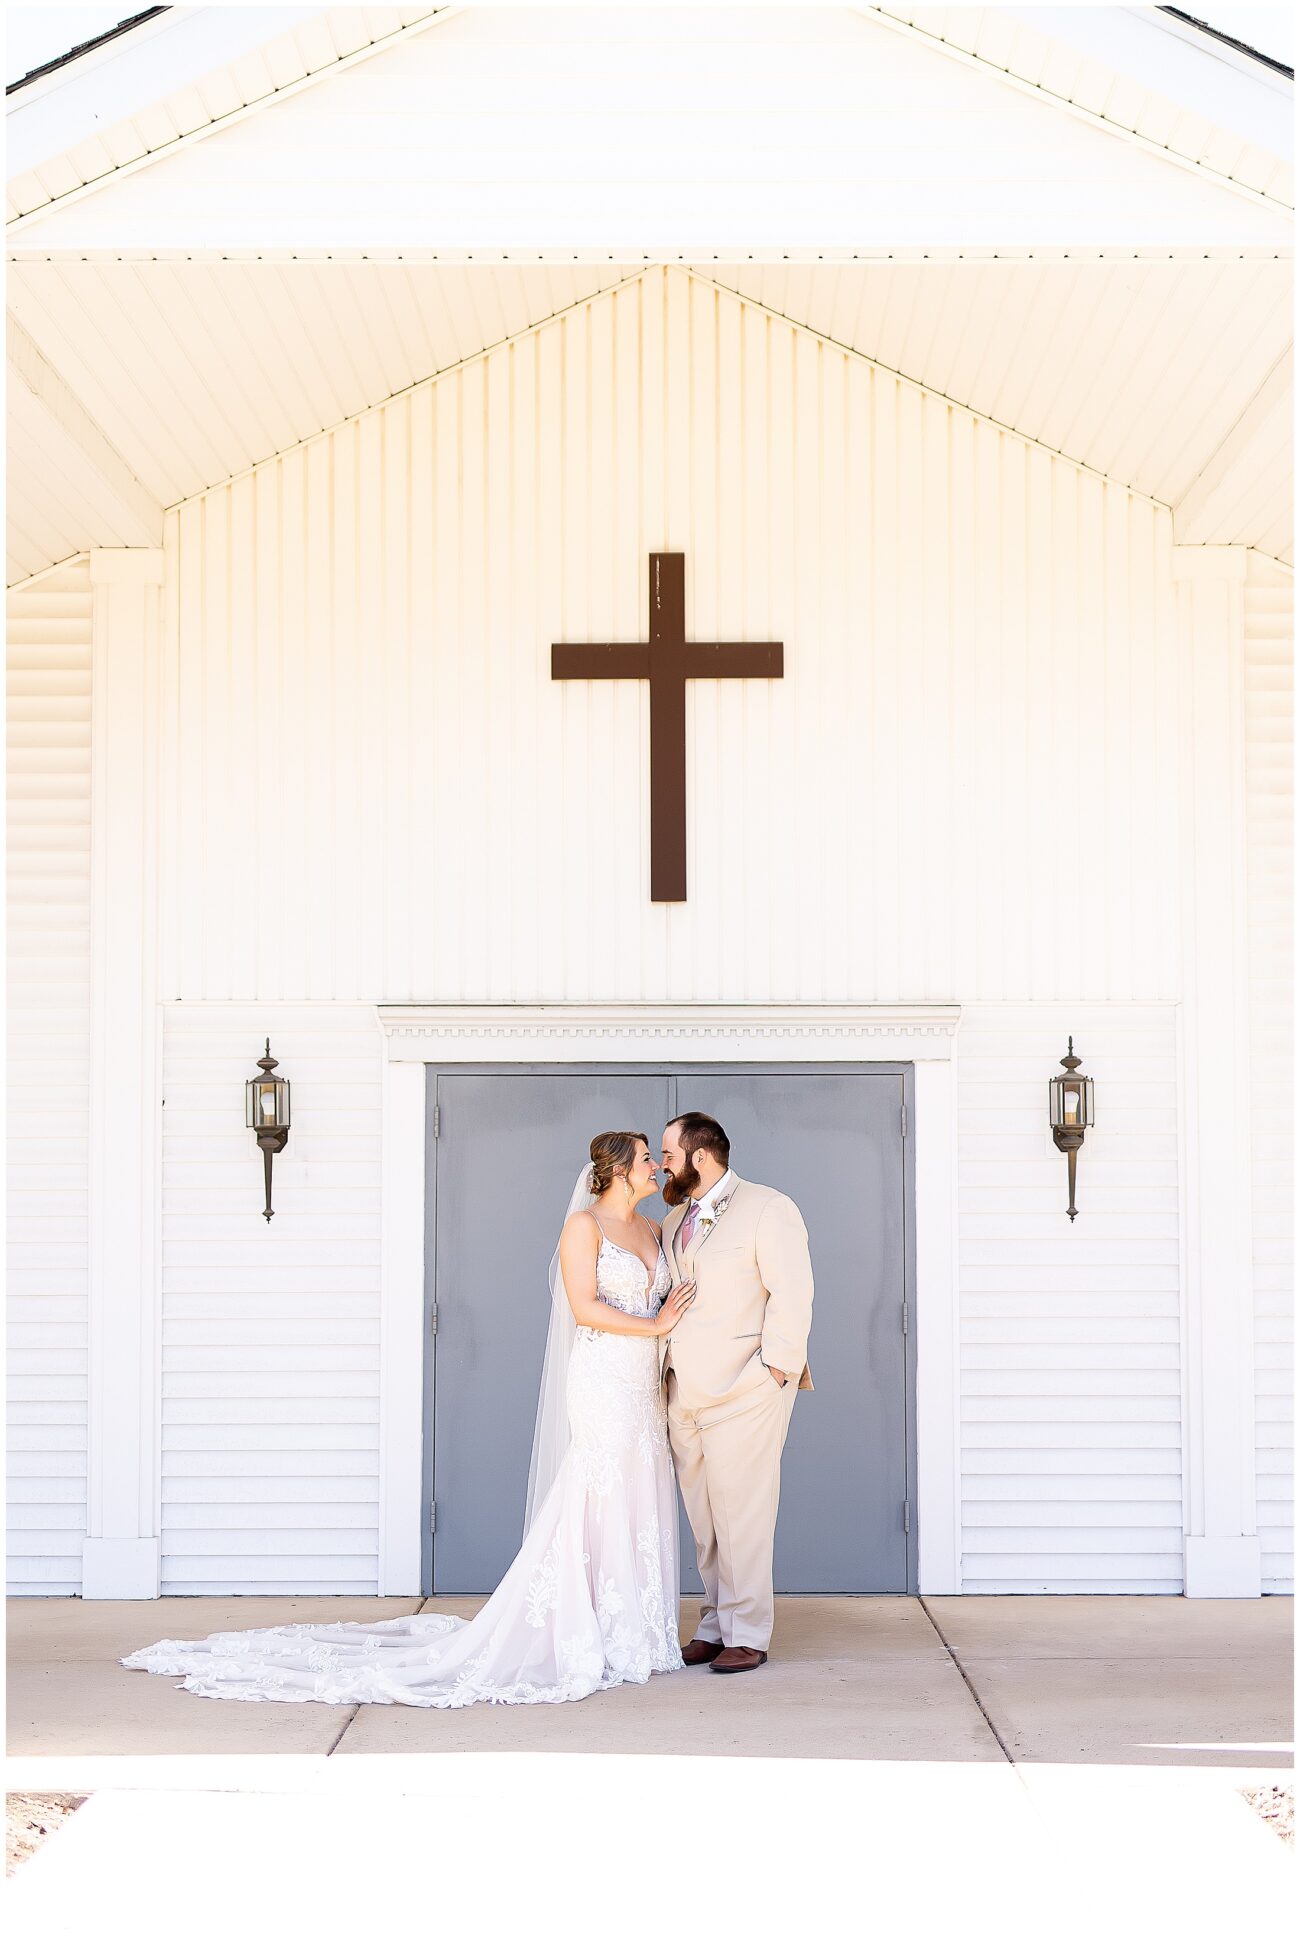 A small town wedding for Casey and Adam. The bride and groom pose for a portrait outside of the church in front of blue doors underneath a cross.

Saint John the Baptist Catholic Church, L'erable, IL. 

Photo taken by Mager Image Photography.